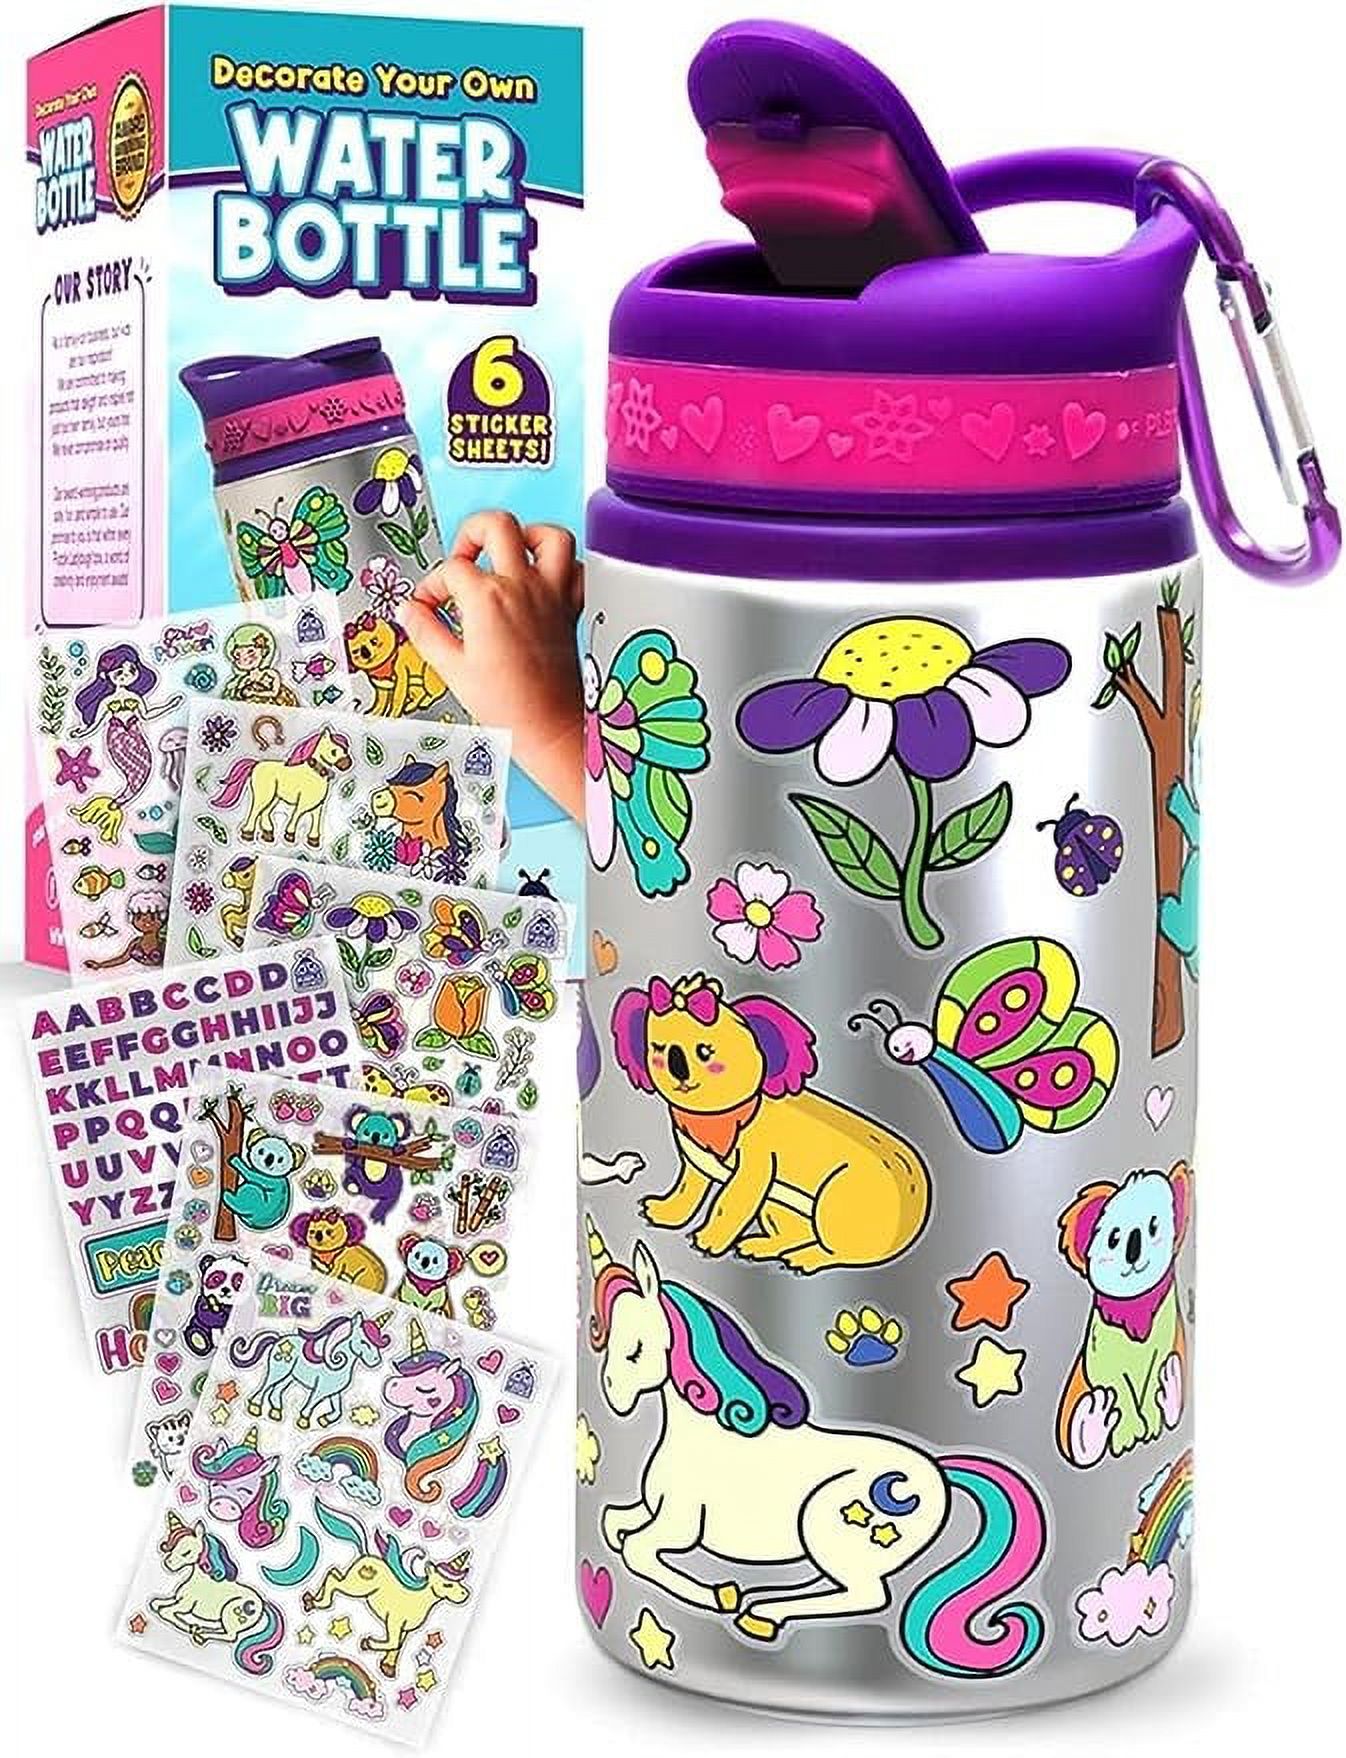 Purple Ladybug Decorate Your Own Water Bottle for Girls Age 6 + - Cool Birthday Gift for 6 Year Old Girl, Little Girl Gifts - Arts and Crafts for Kids